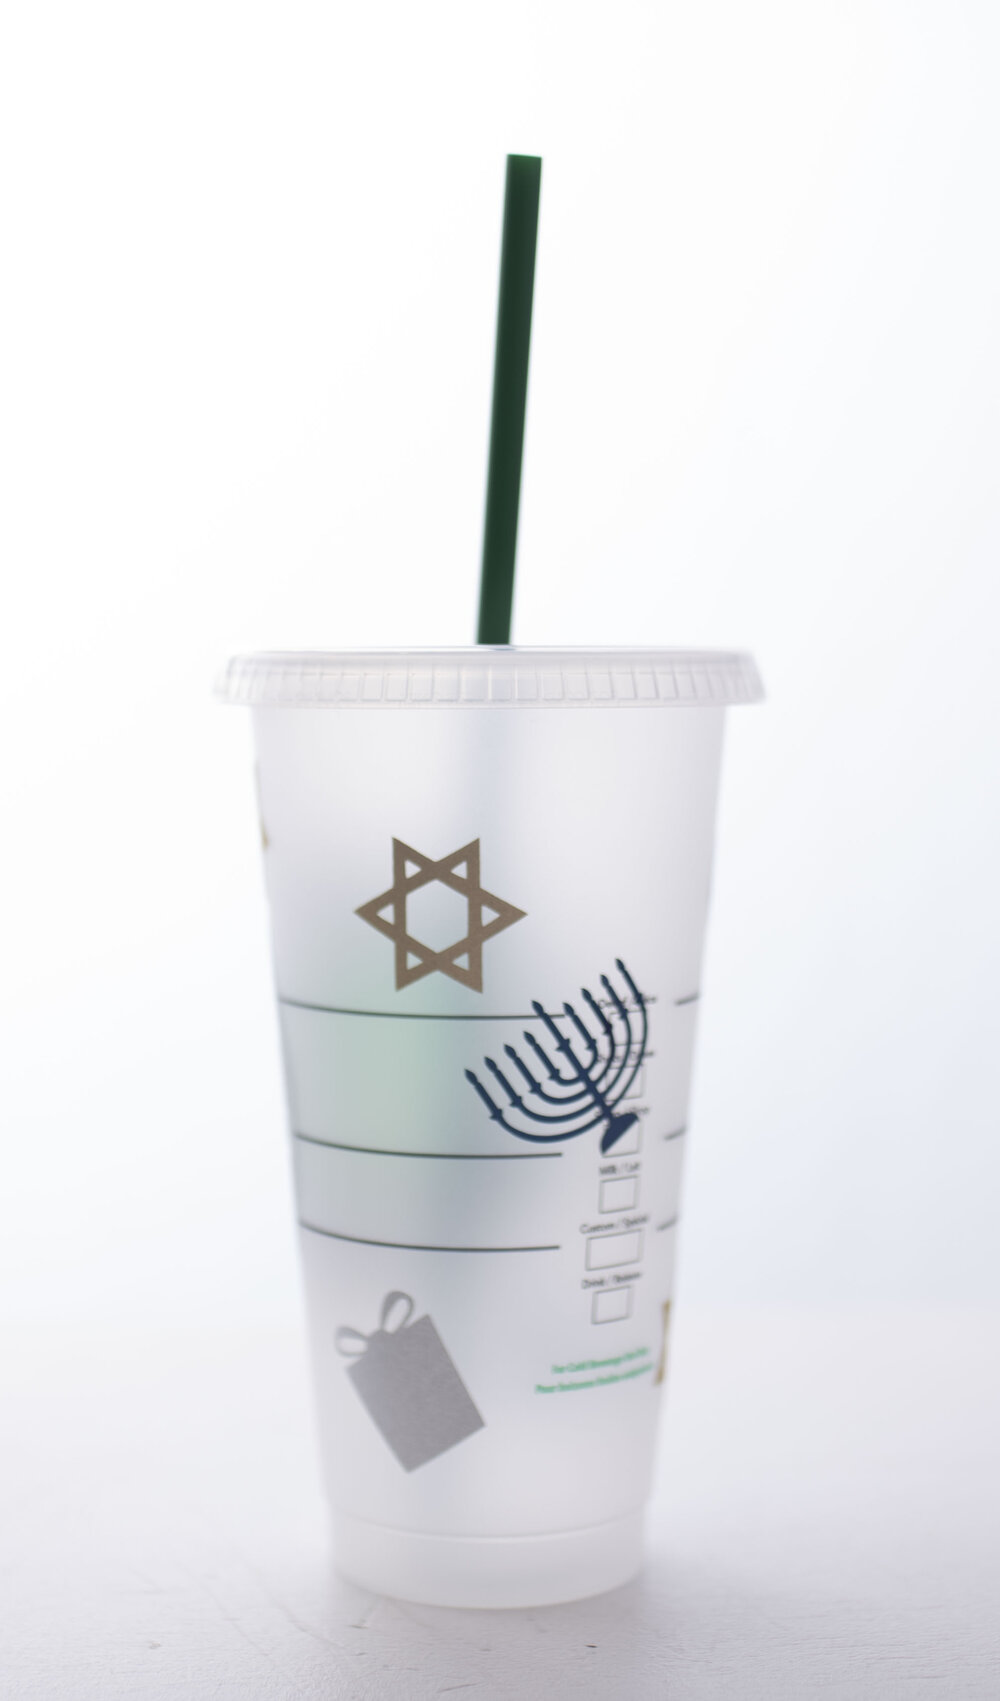 Starbucks Holiday 2020 Collection Ornament Cups — Tiny V's Closet